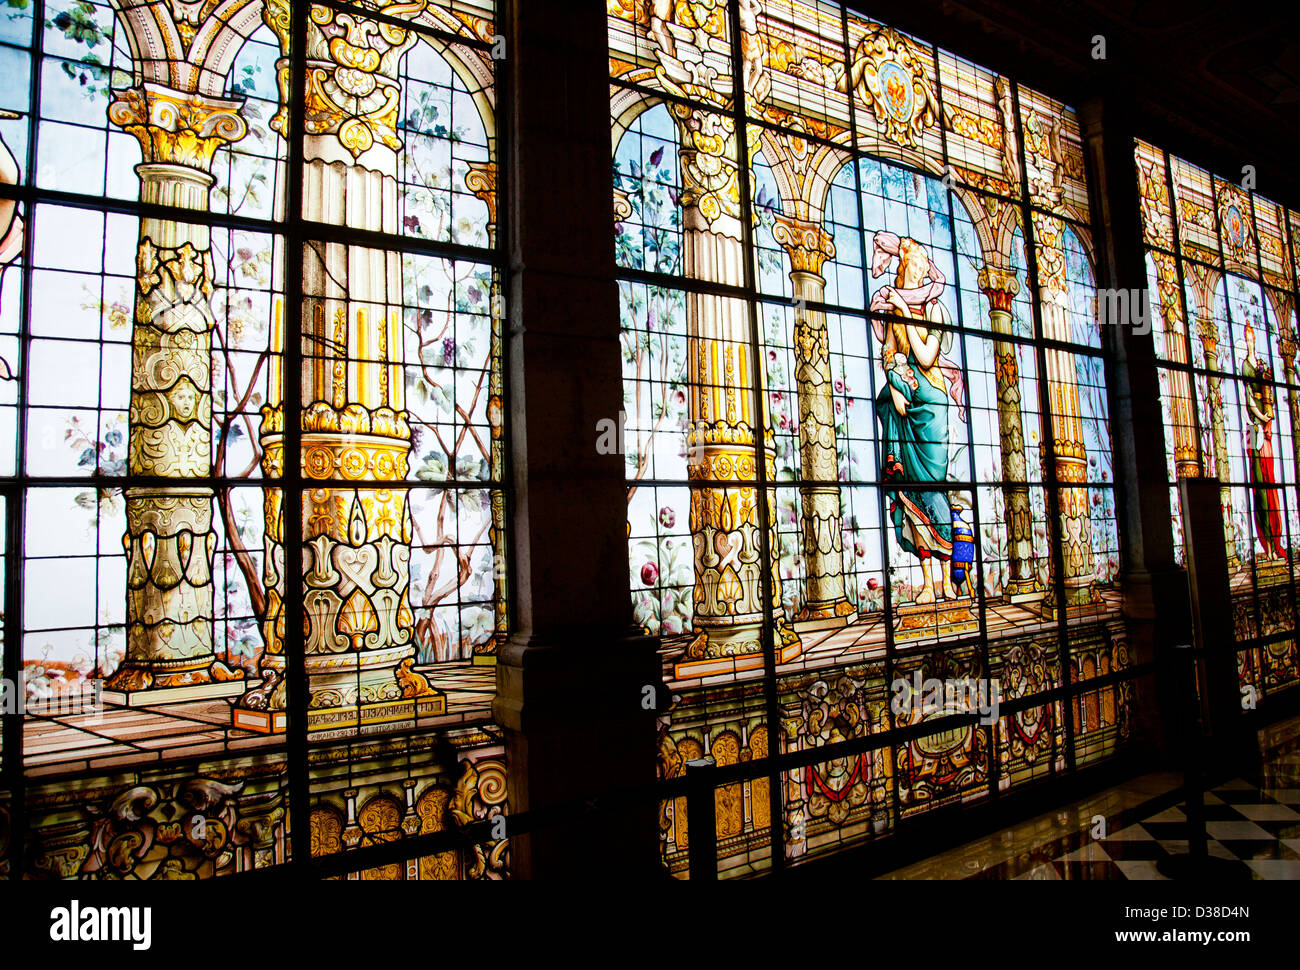 Stained Glass Gallery at Chapultepec Castle in Mexico City DF - Bathroom Stock Photo